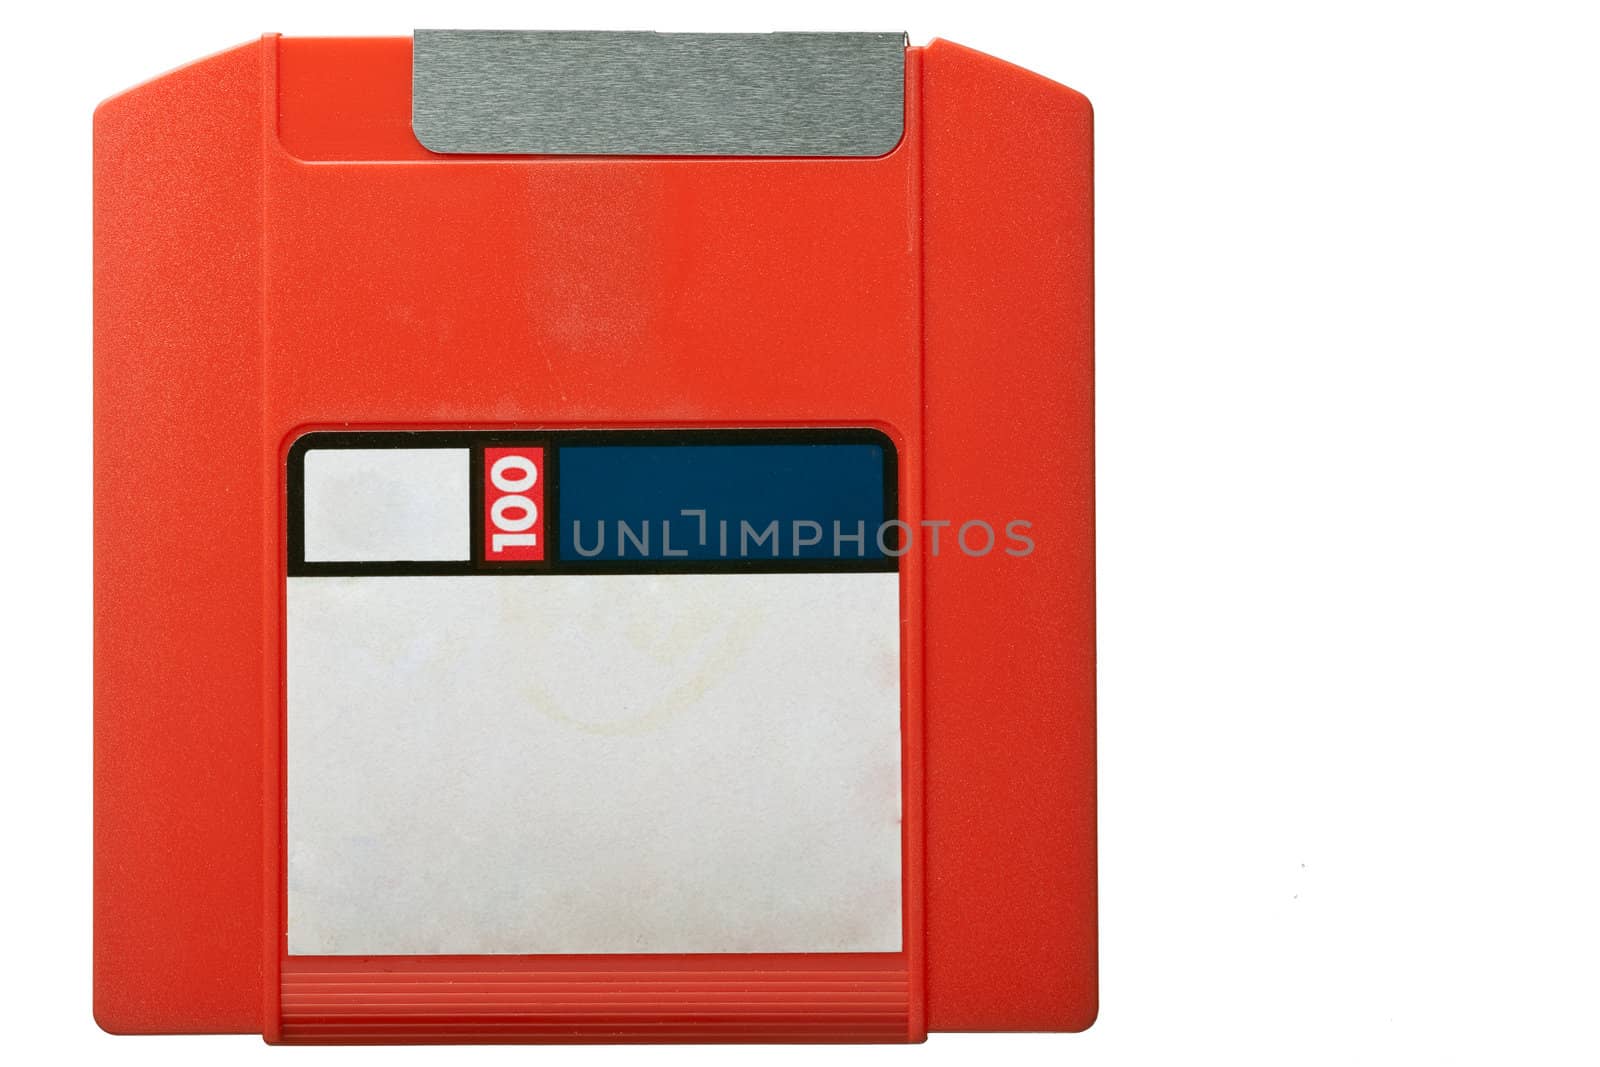 Old zip drive type of disk isolated on white. All logos removed.